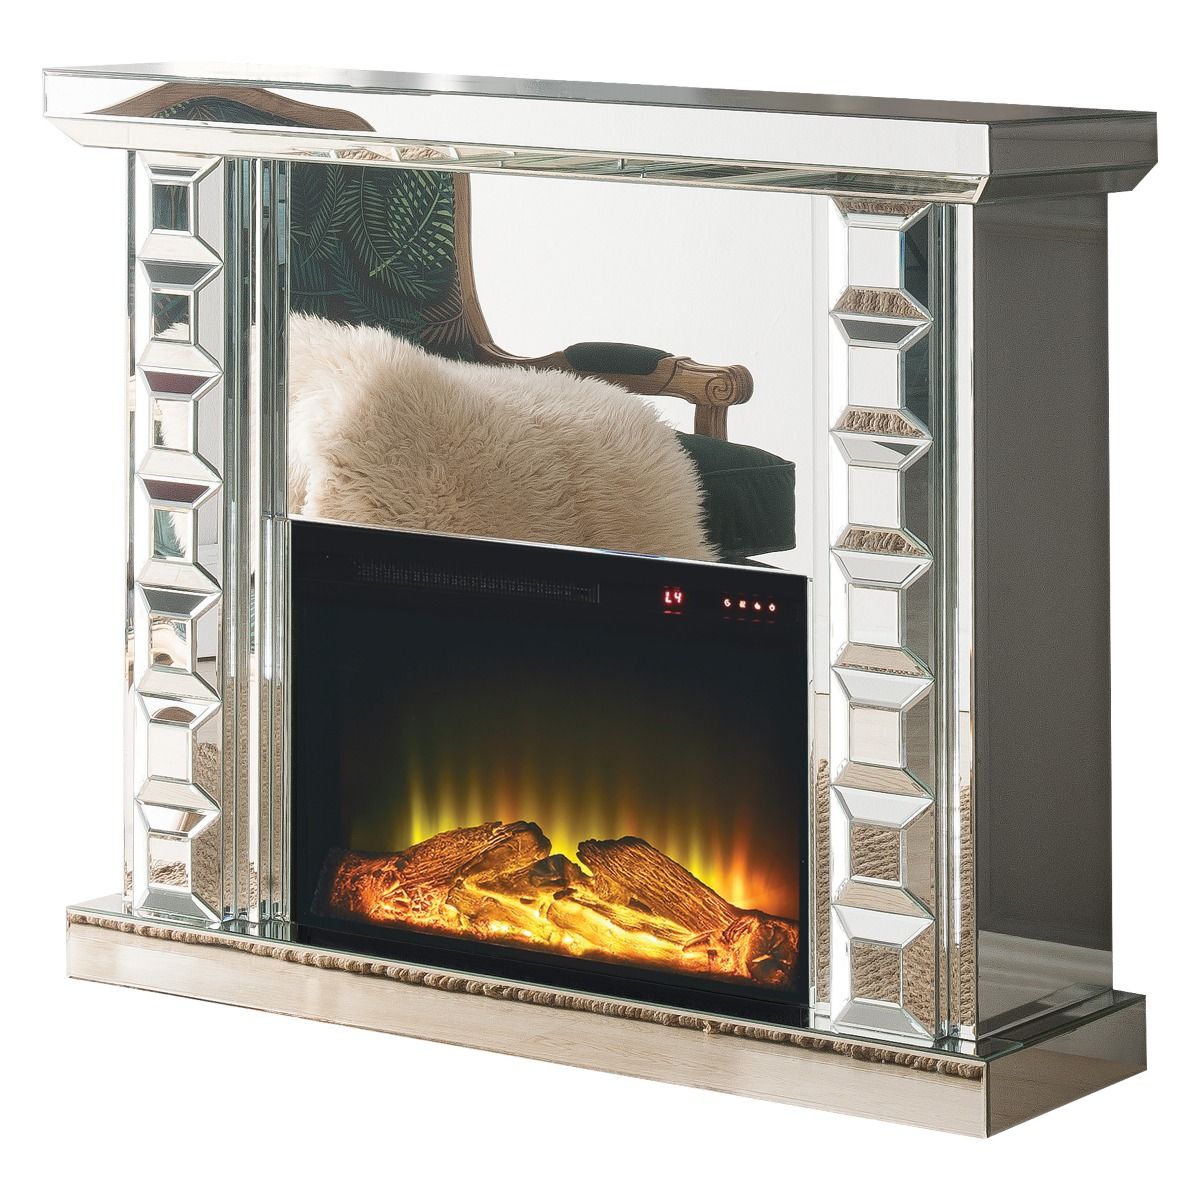 Dominic - Fireplace - Mirrored